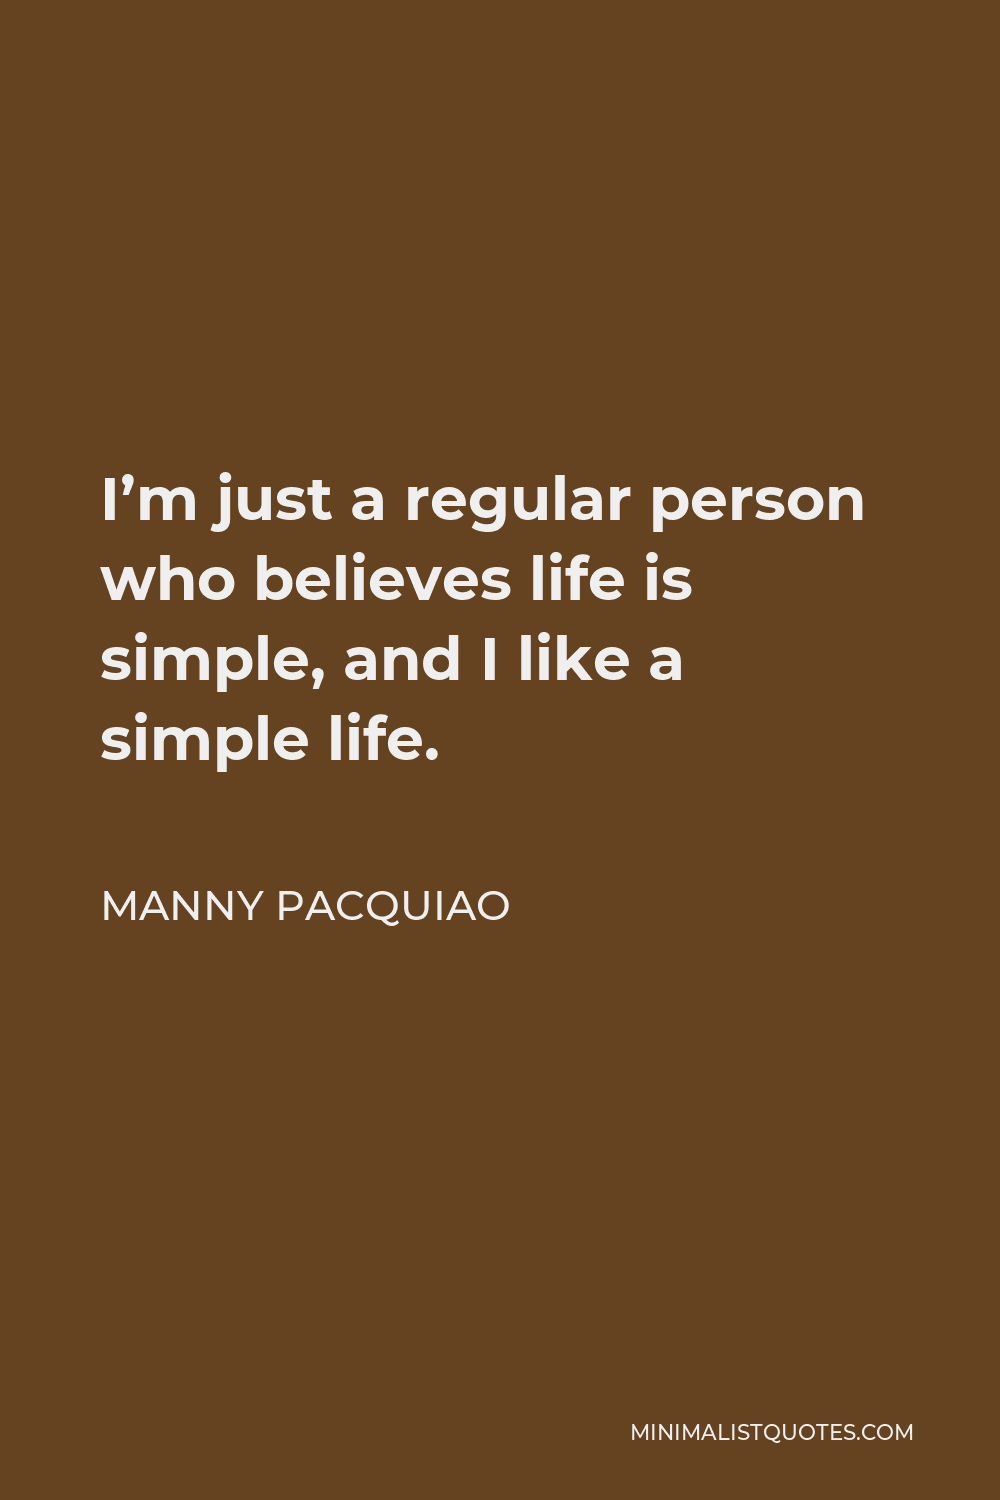 Manny Pacquiao Quote - I’m just a regular person who believes life is simple, and I like a simple life.